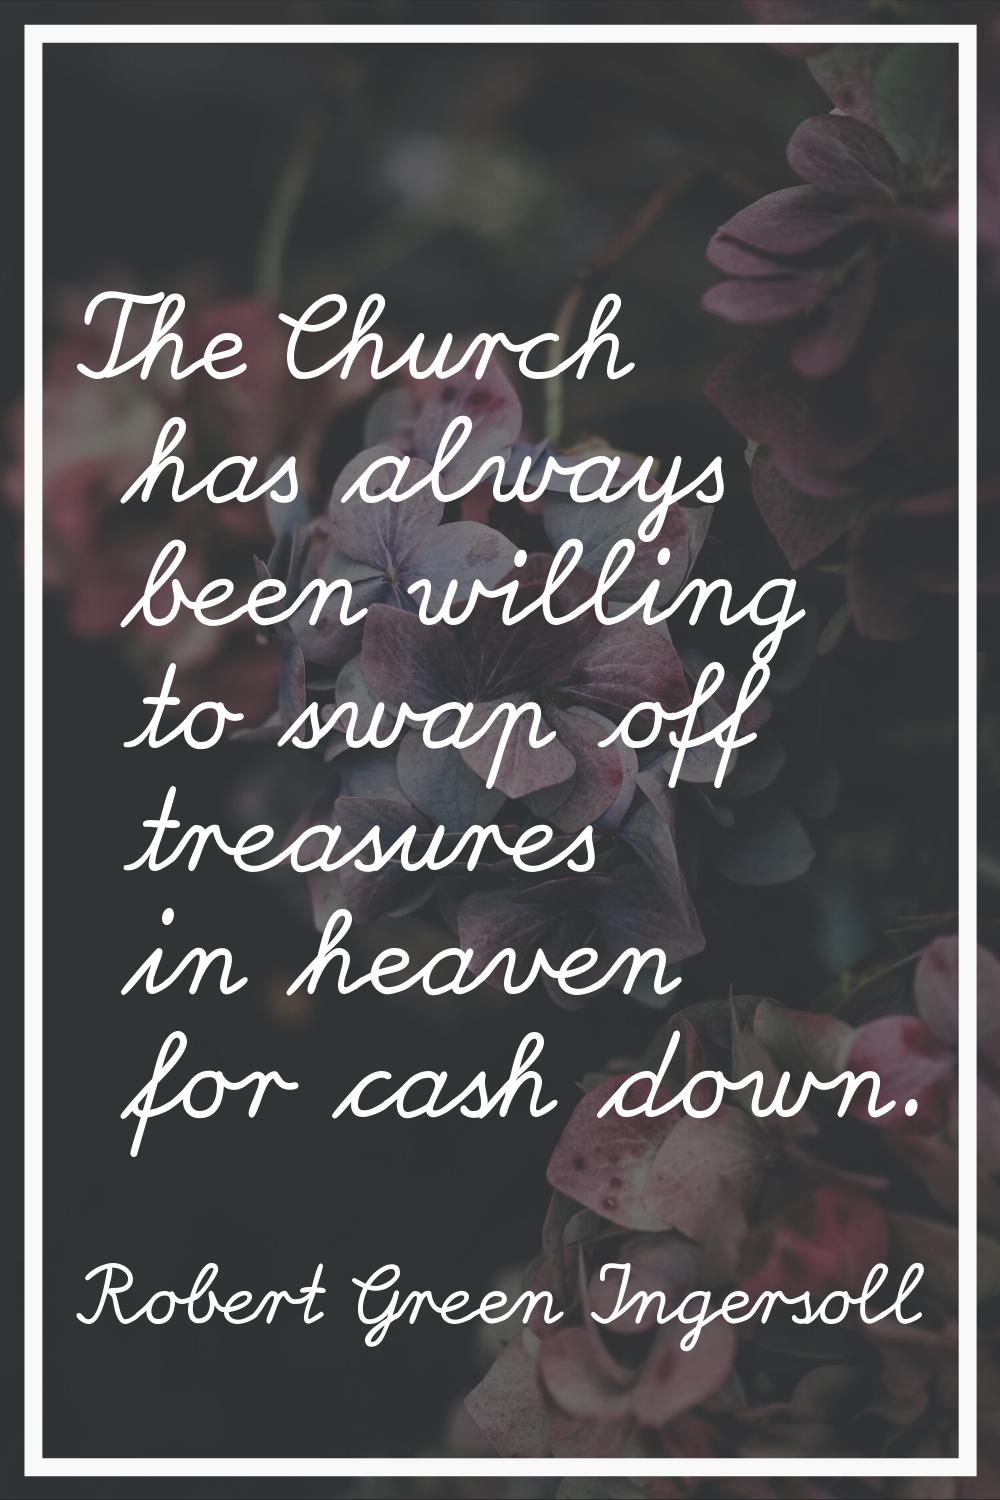 The Church has always been willing to swap off treasures in heaven for cash down.